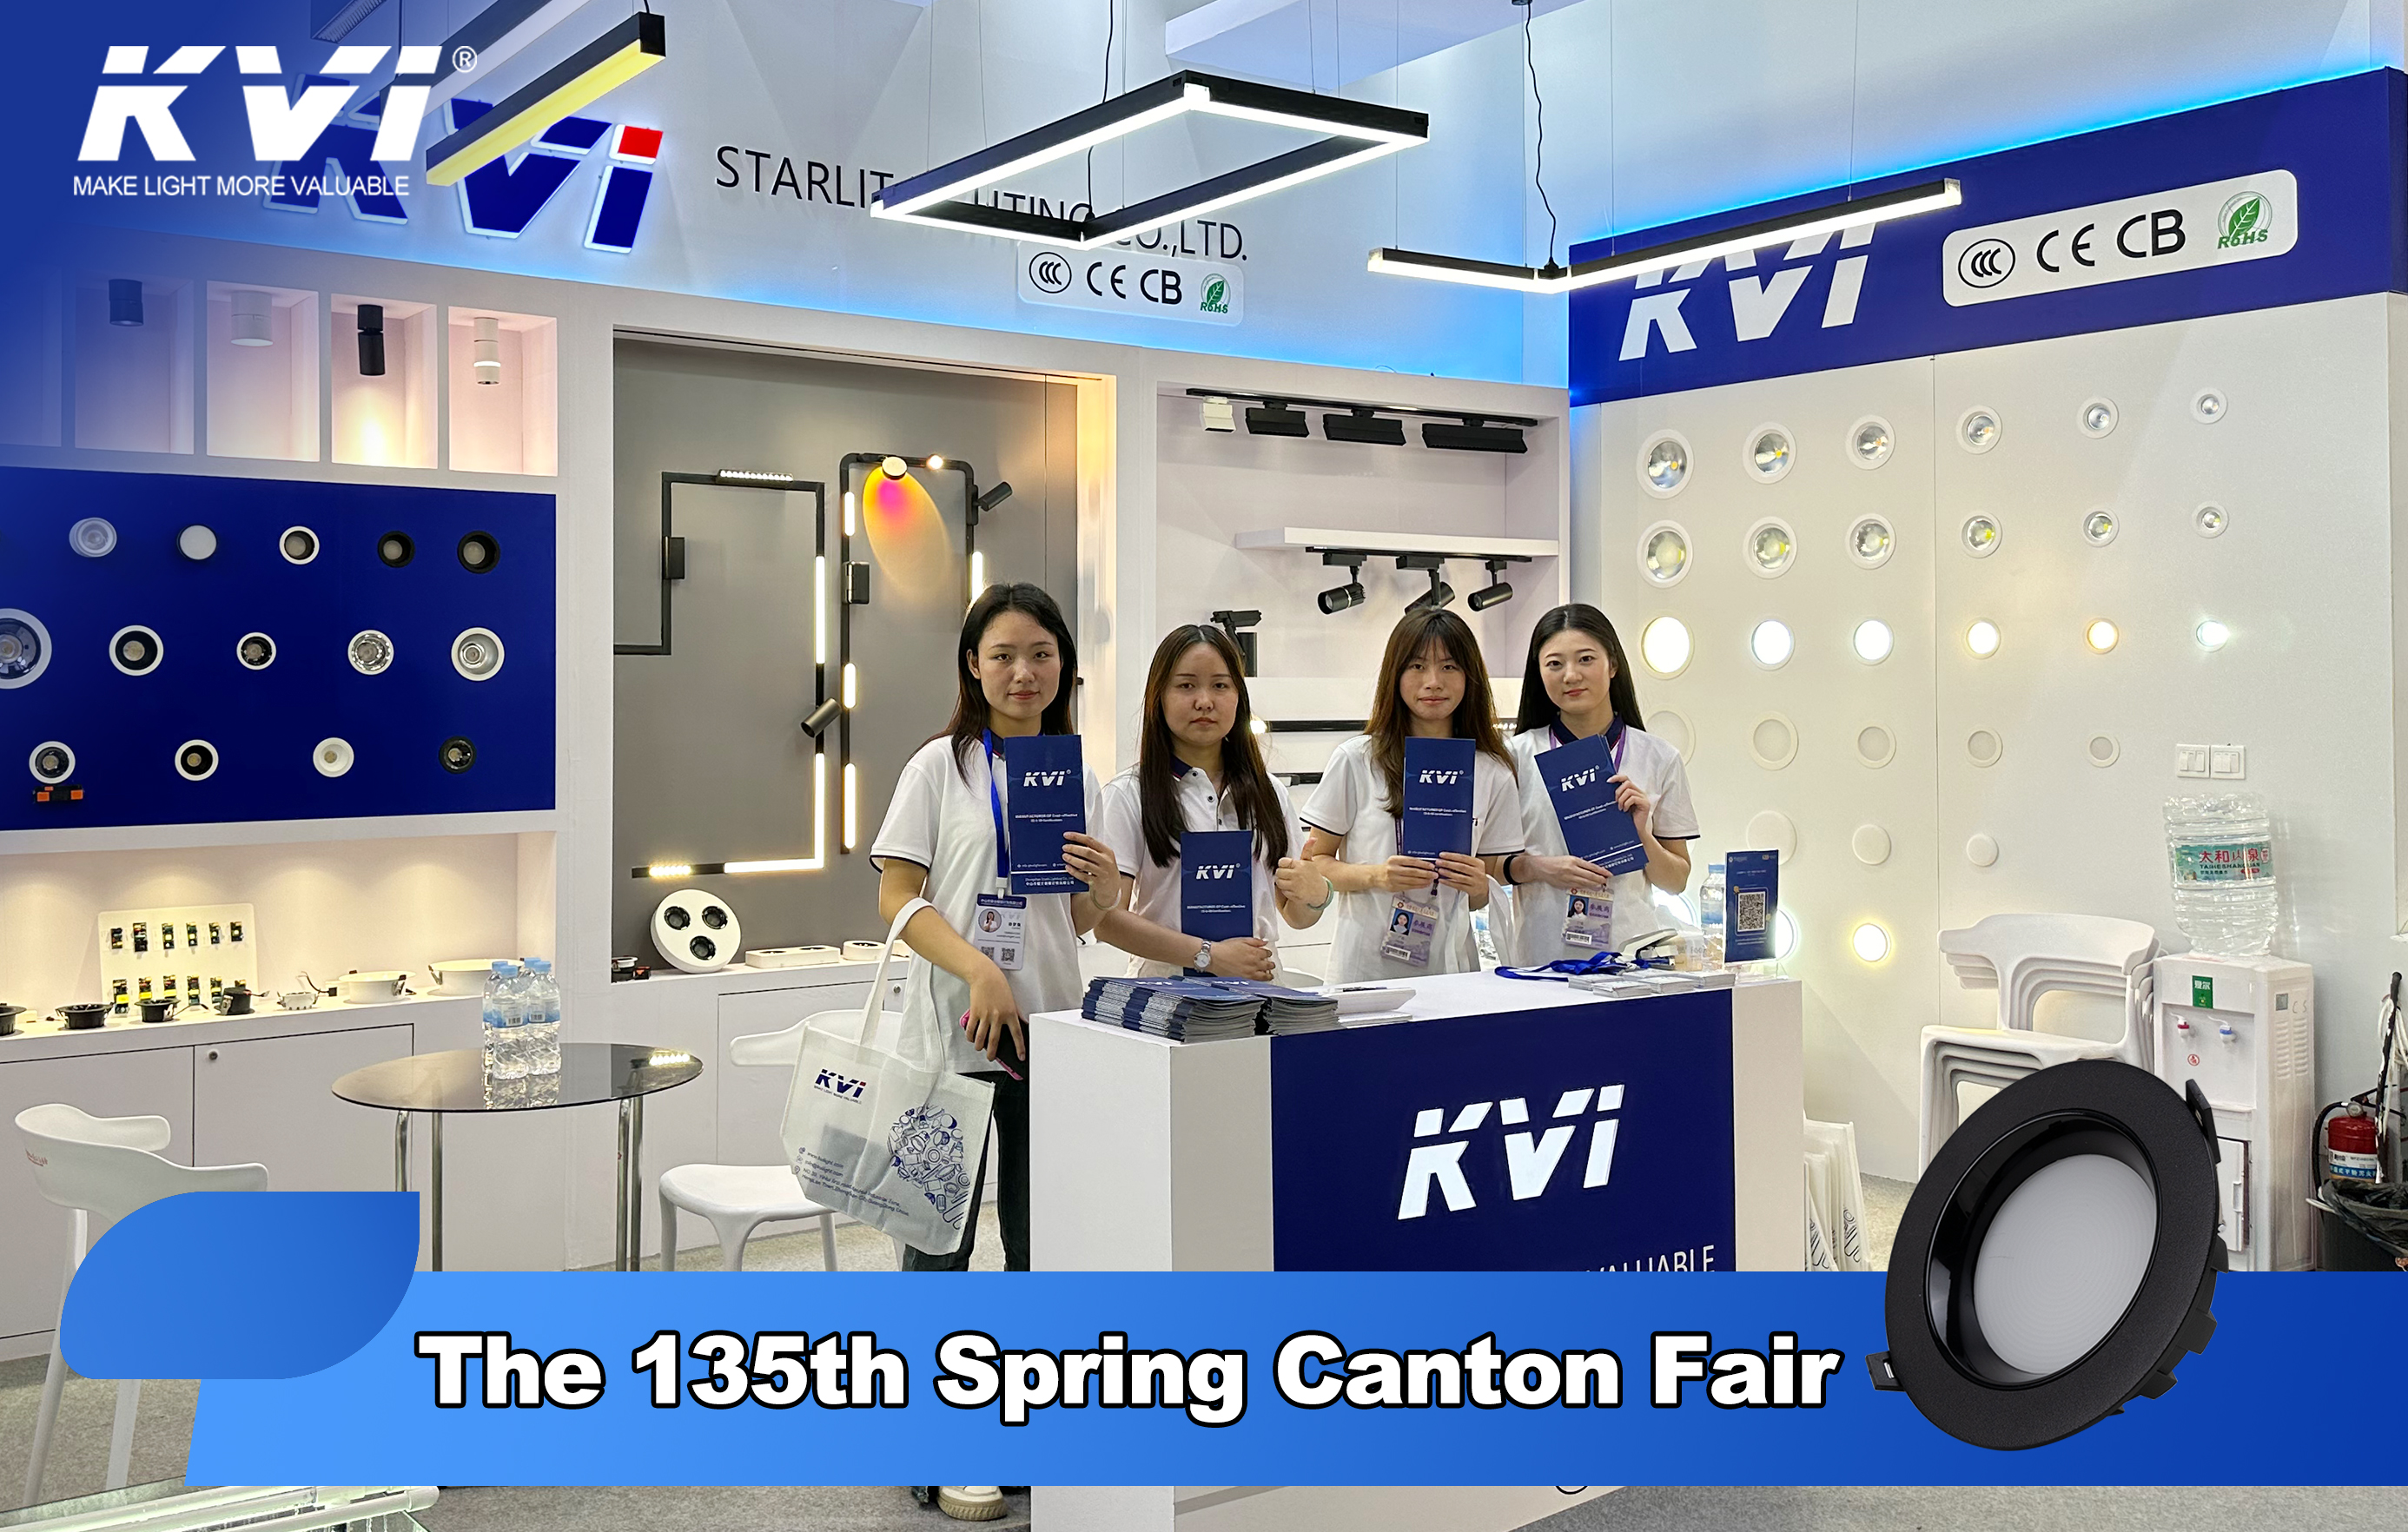 Reflecting on the 135th Spring Canton Fair Experience at KVI